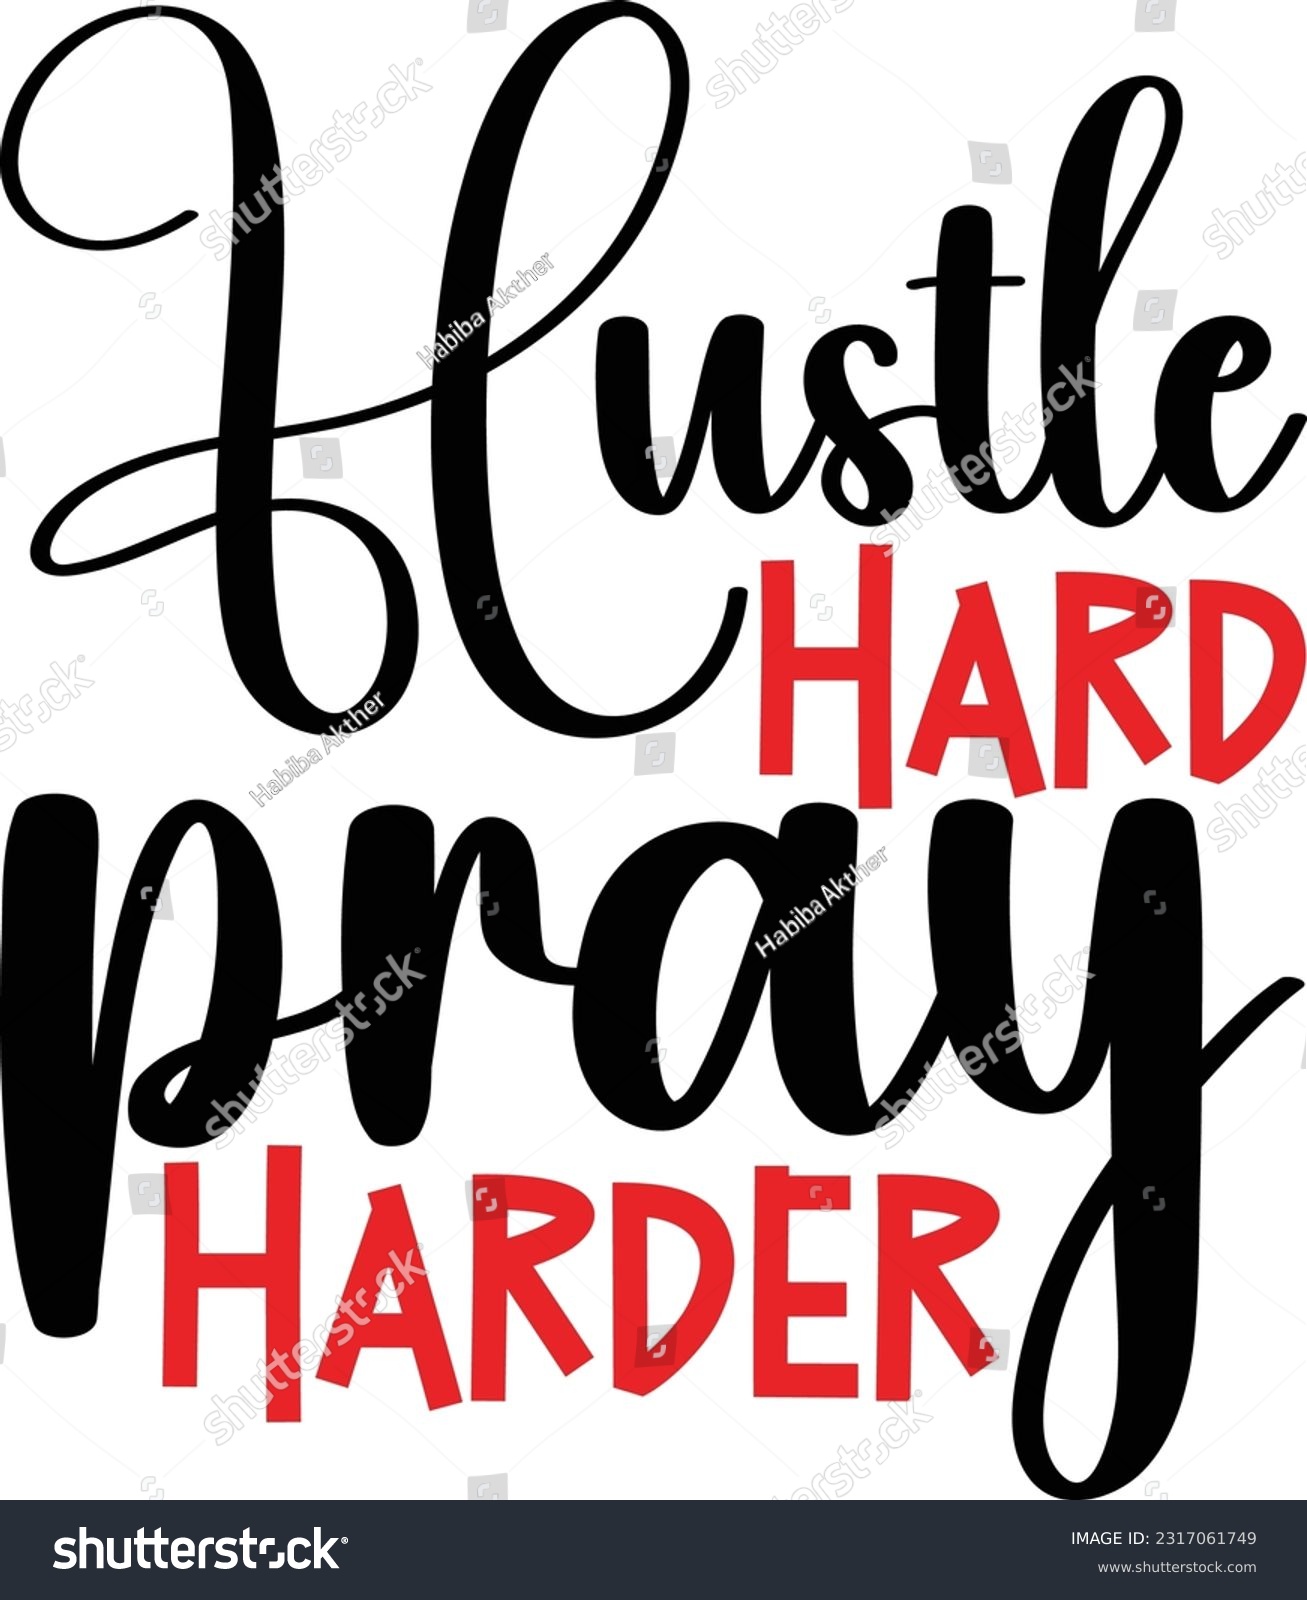 SVG of Hustle hard pray harder,Faith svg,But first pray,Religious SVG,Jesus,God, Faith quotes,Christian Svg,Vector,Scripture Svg,Farmhouse Svg,Country,Kitchen Home Decor,Silhouette, svg